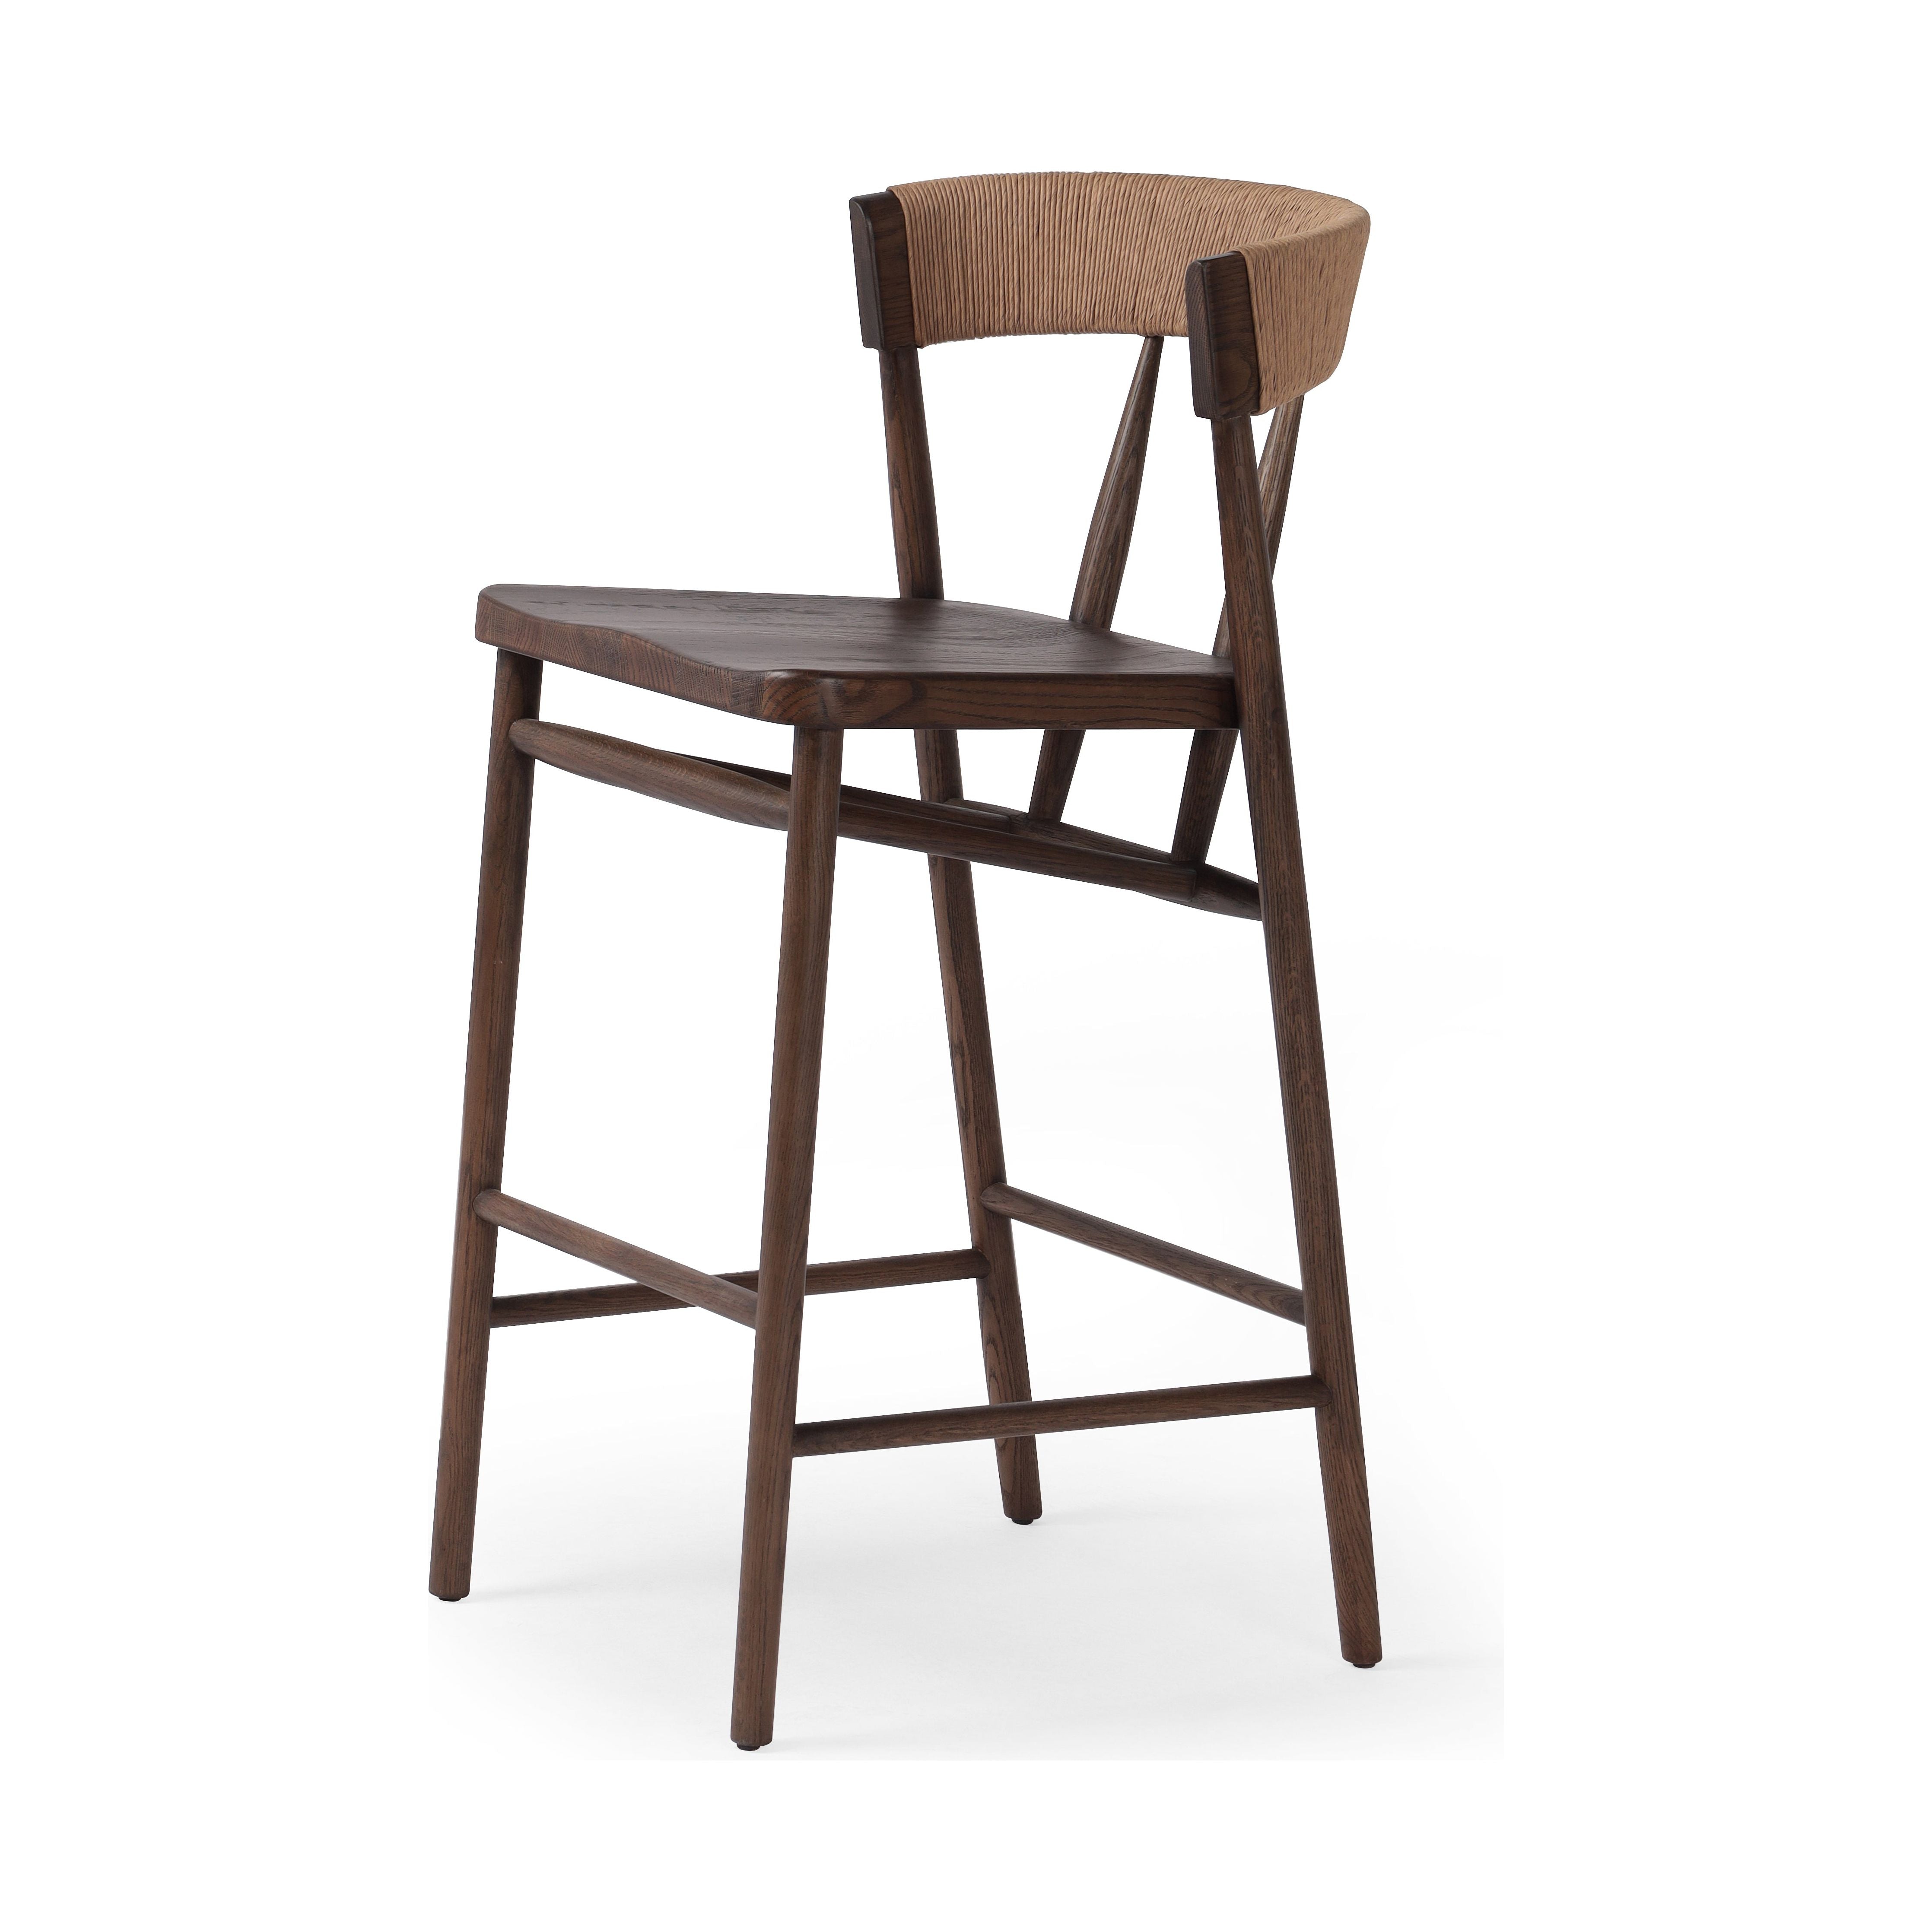 A solid oak bar stool defined by tapered legs and framing gives an updated look to the classic whistler chair. Finished with a paper rush wrapped detail on the back. Amethyst Home provides interior design, new construction, custom furniture, and area rugs in the Salt Lake City metro area.